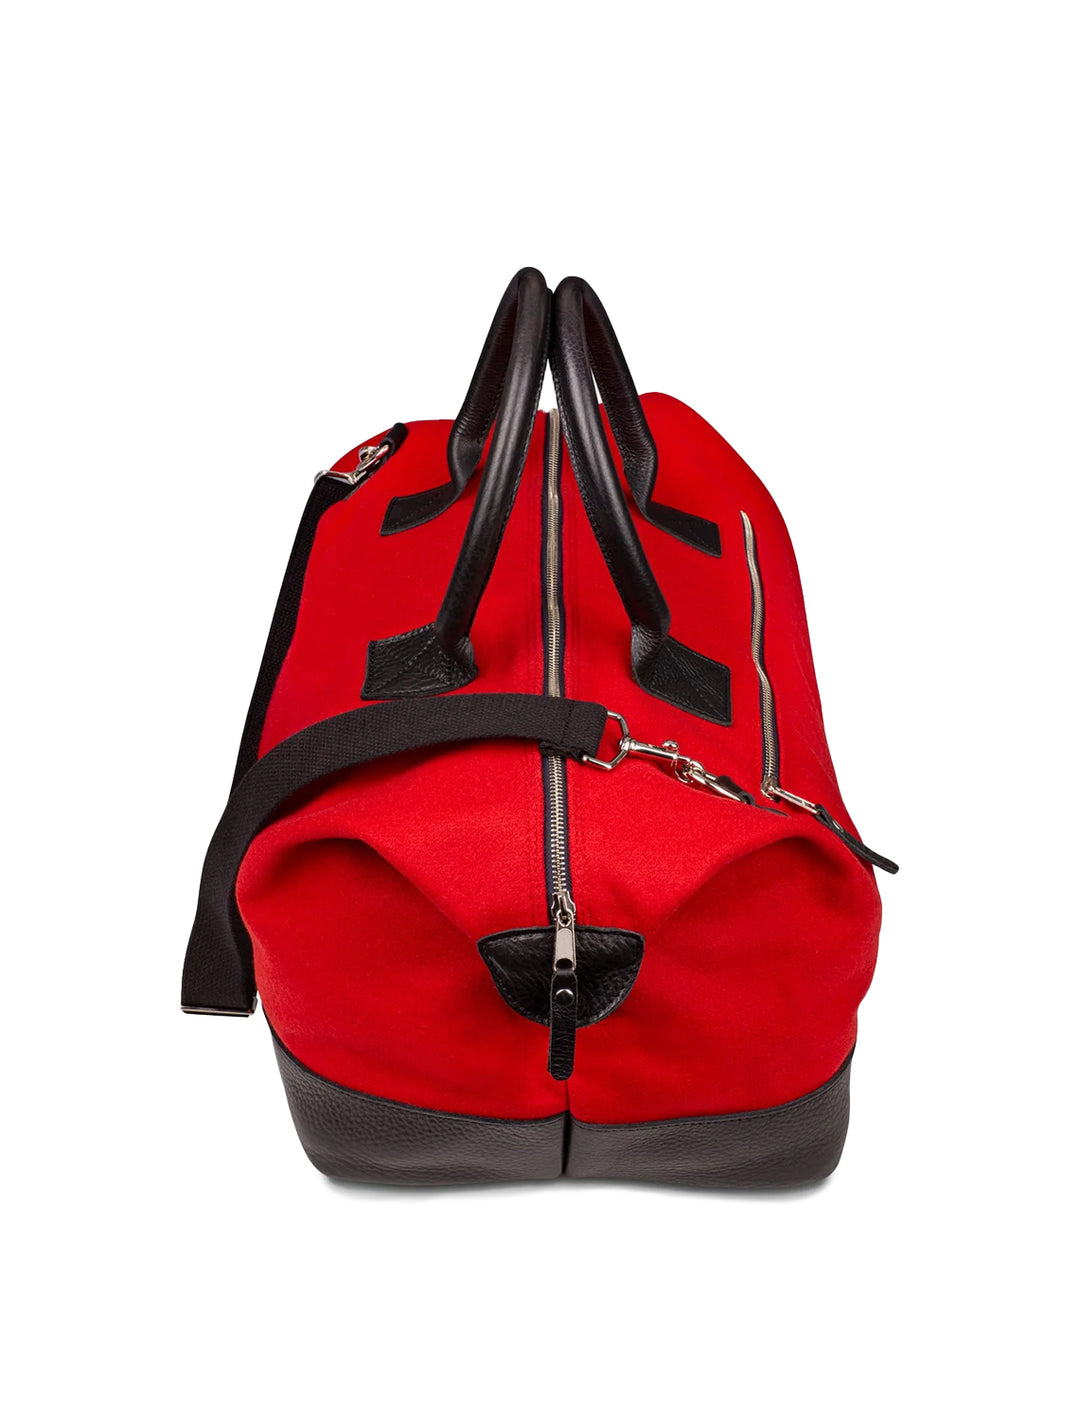 Side angle view of Heritage Gear's red bucky mascot weekender.